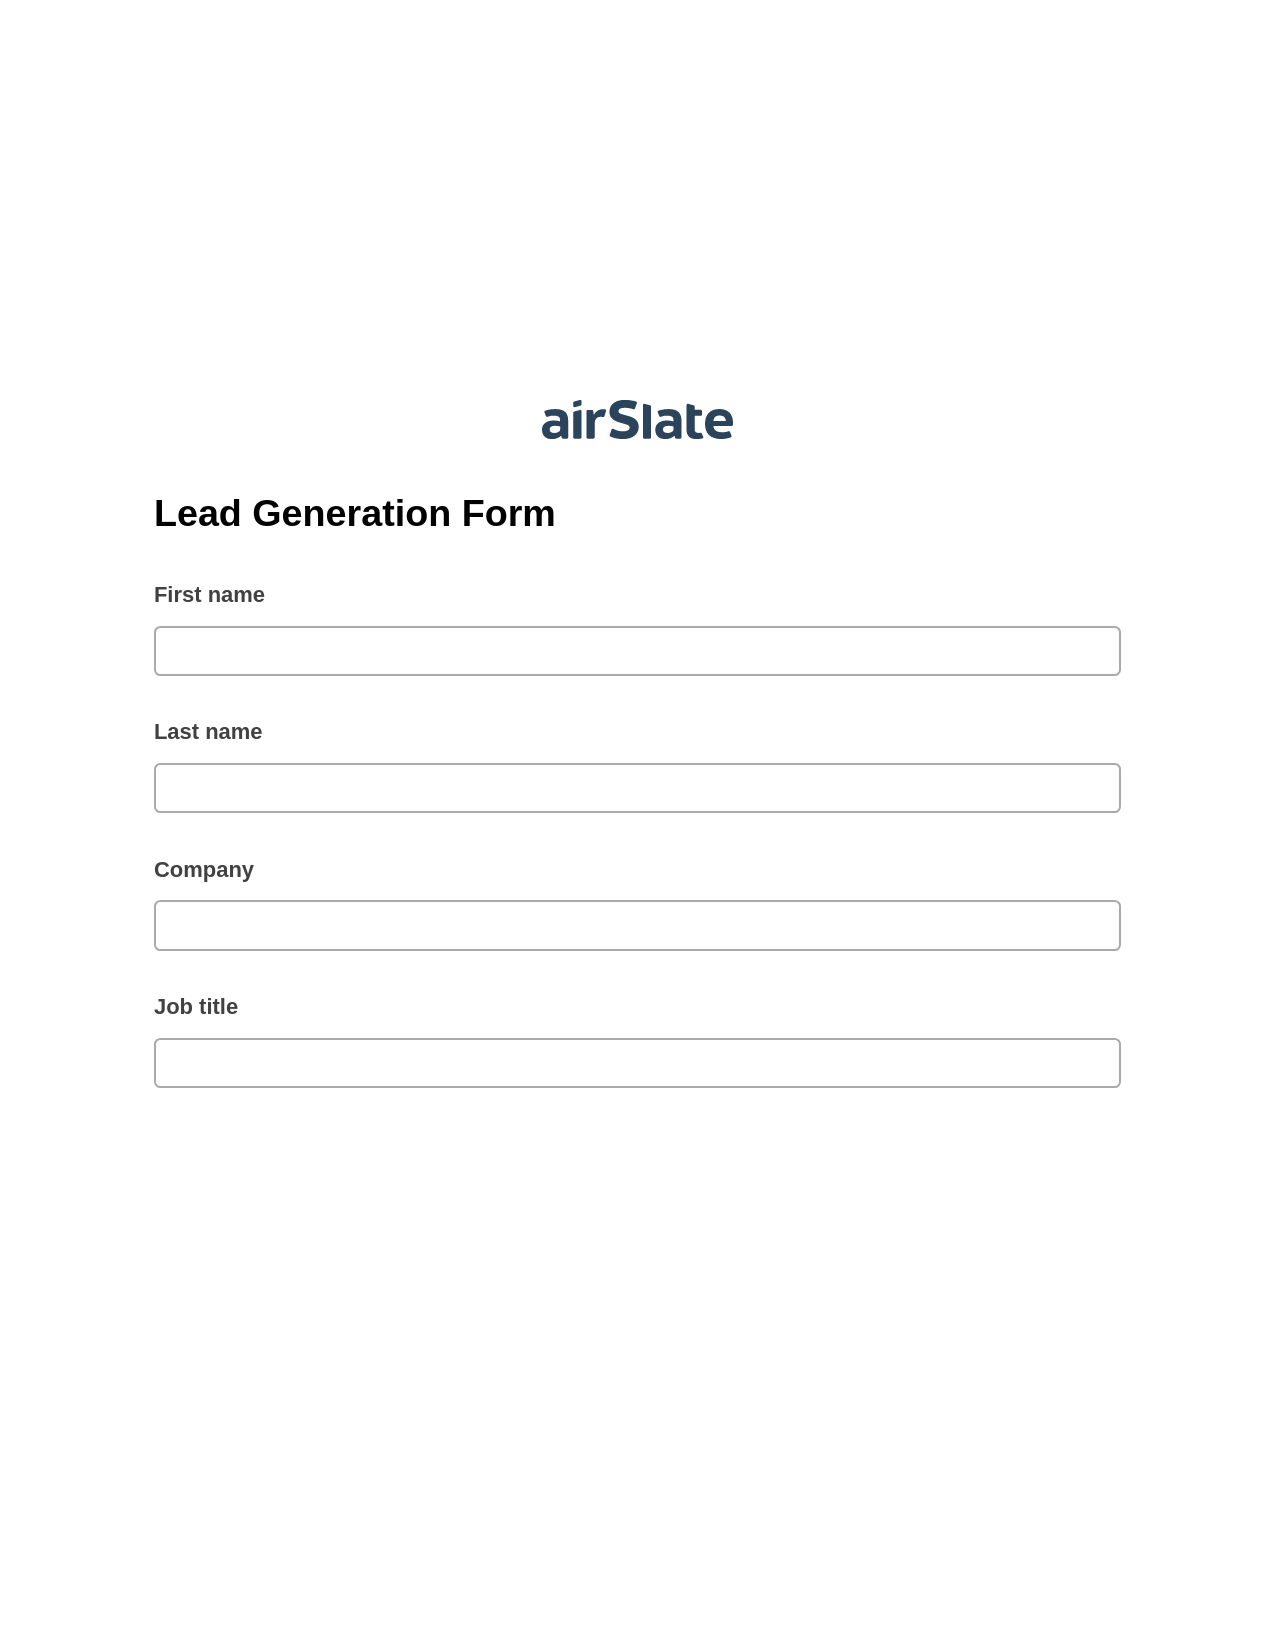 Lead Generation Form Pre-fill Dropdowns from Airtable, Send a Slate with Roles Bot, Archive to Google Drive Bot